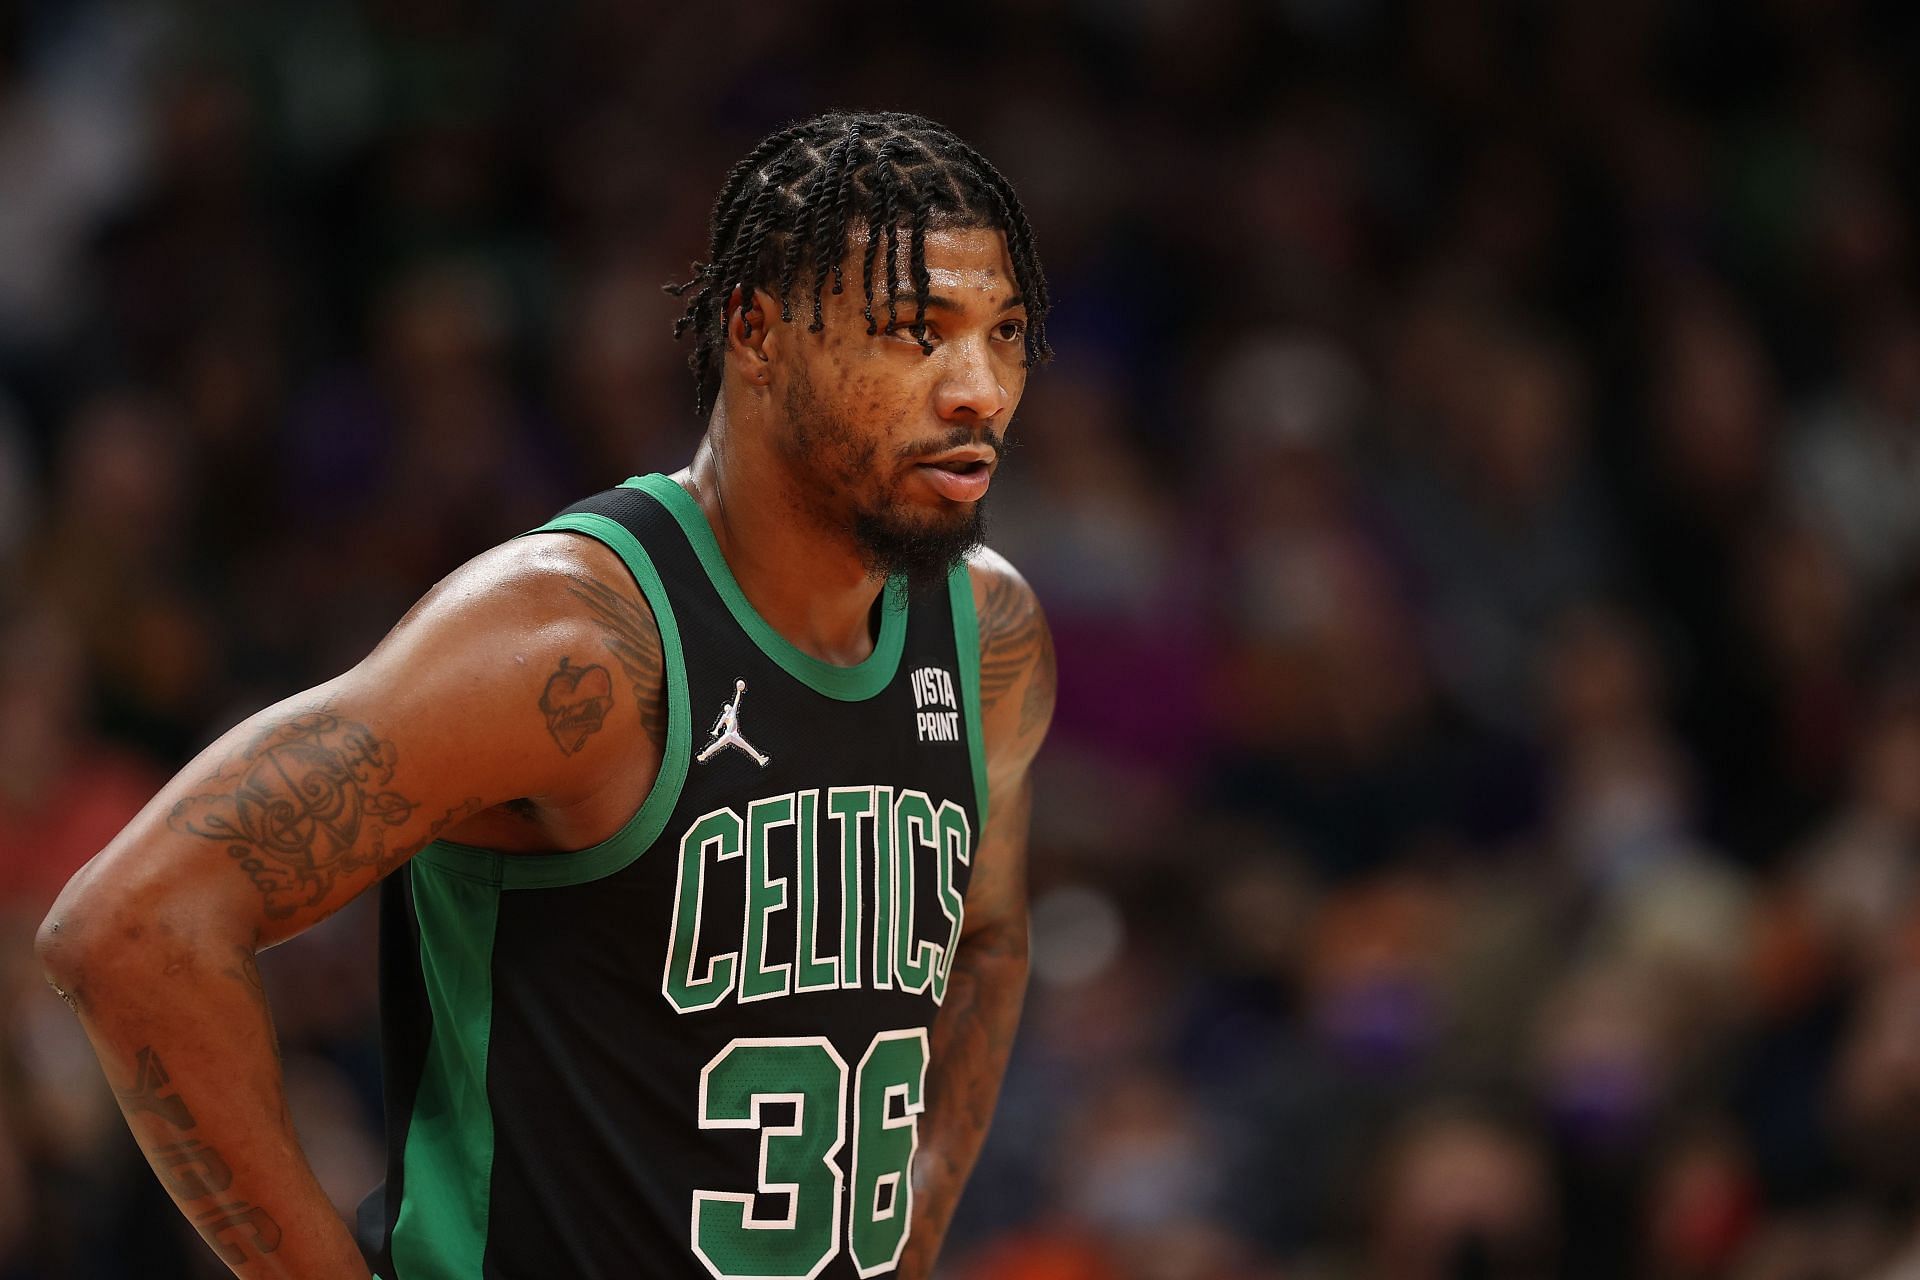 Marcus Smart will be available in this game for the Boston Celtics